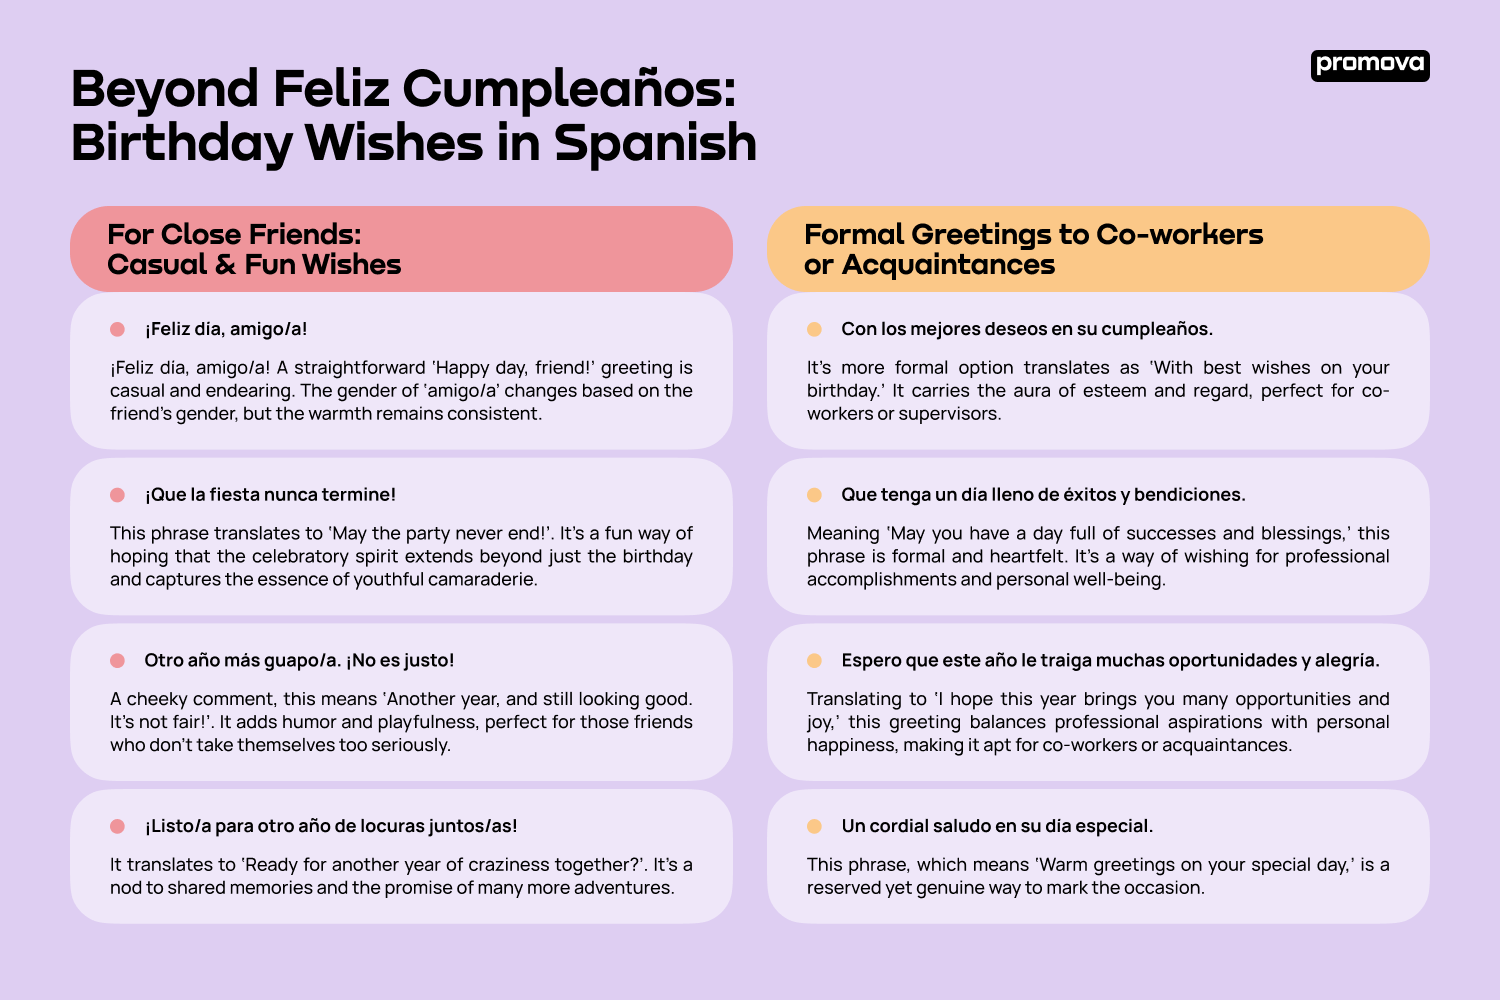 thank you for the birthday wishes in spanish